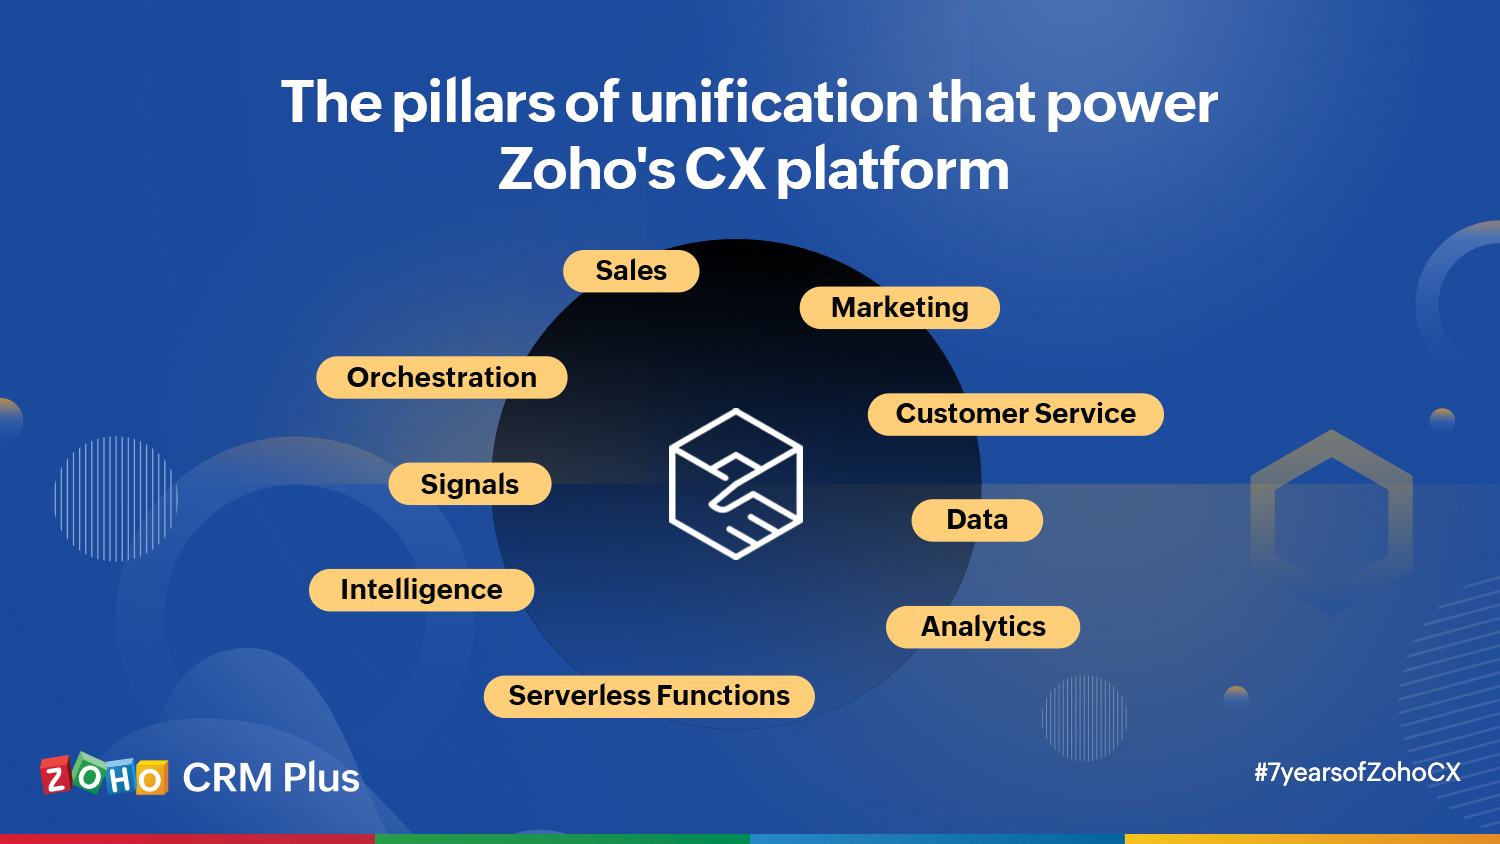 The pillars of unification that power Zoho’s CX platform